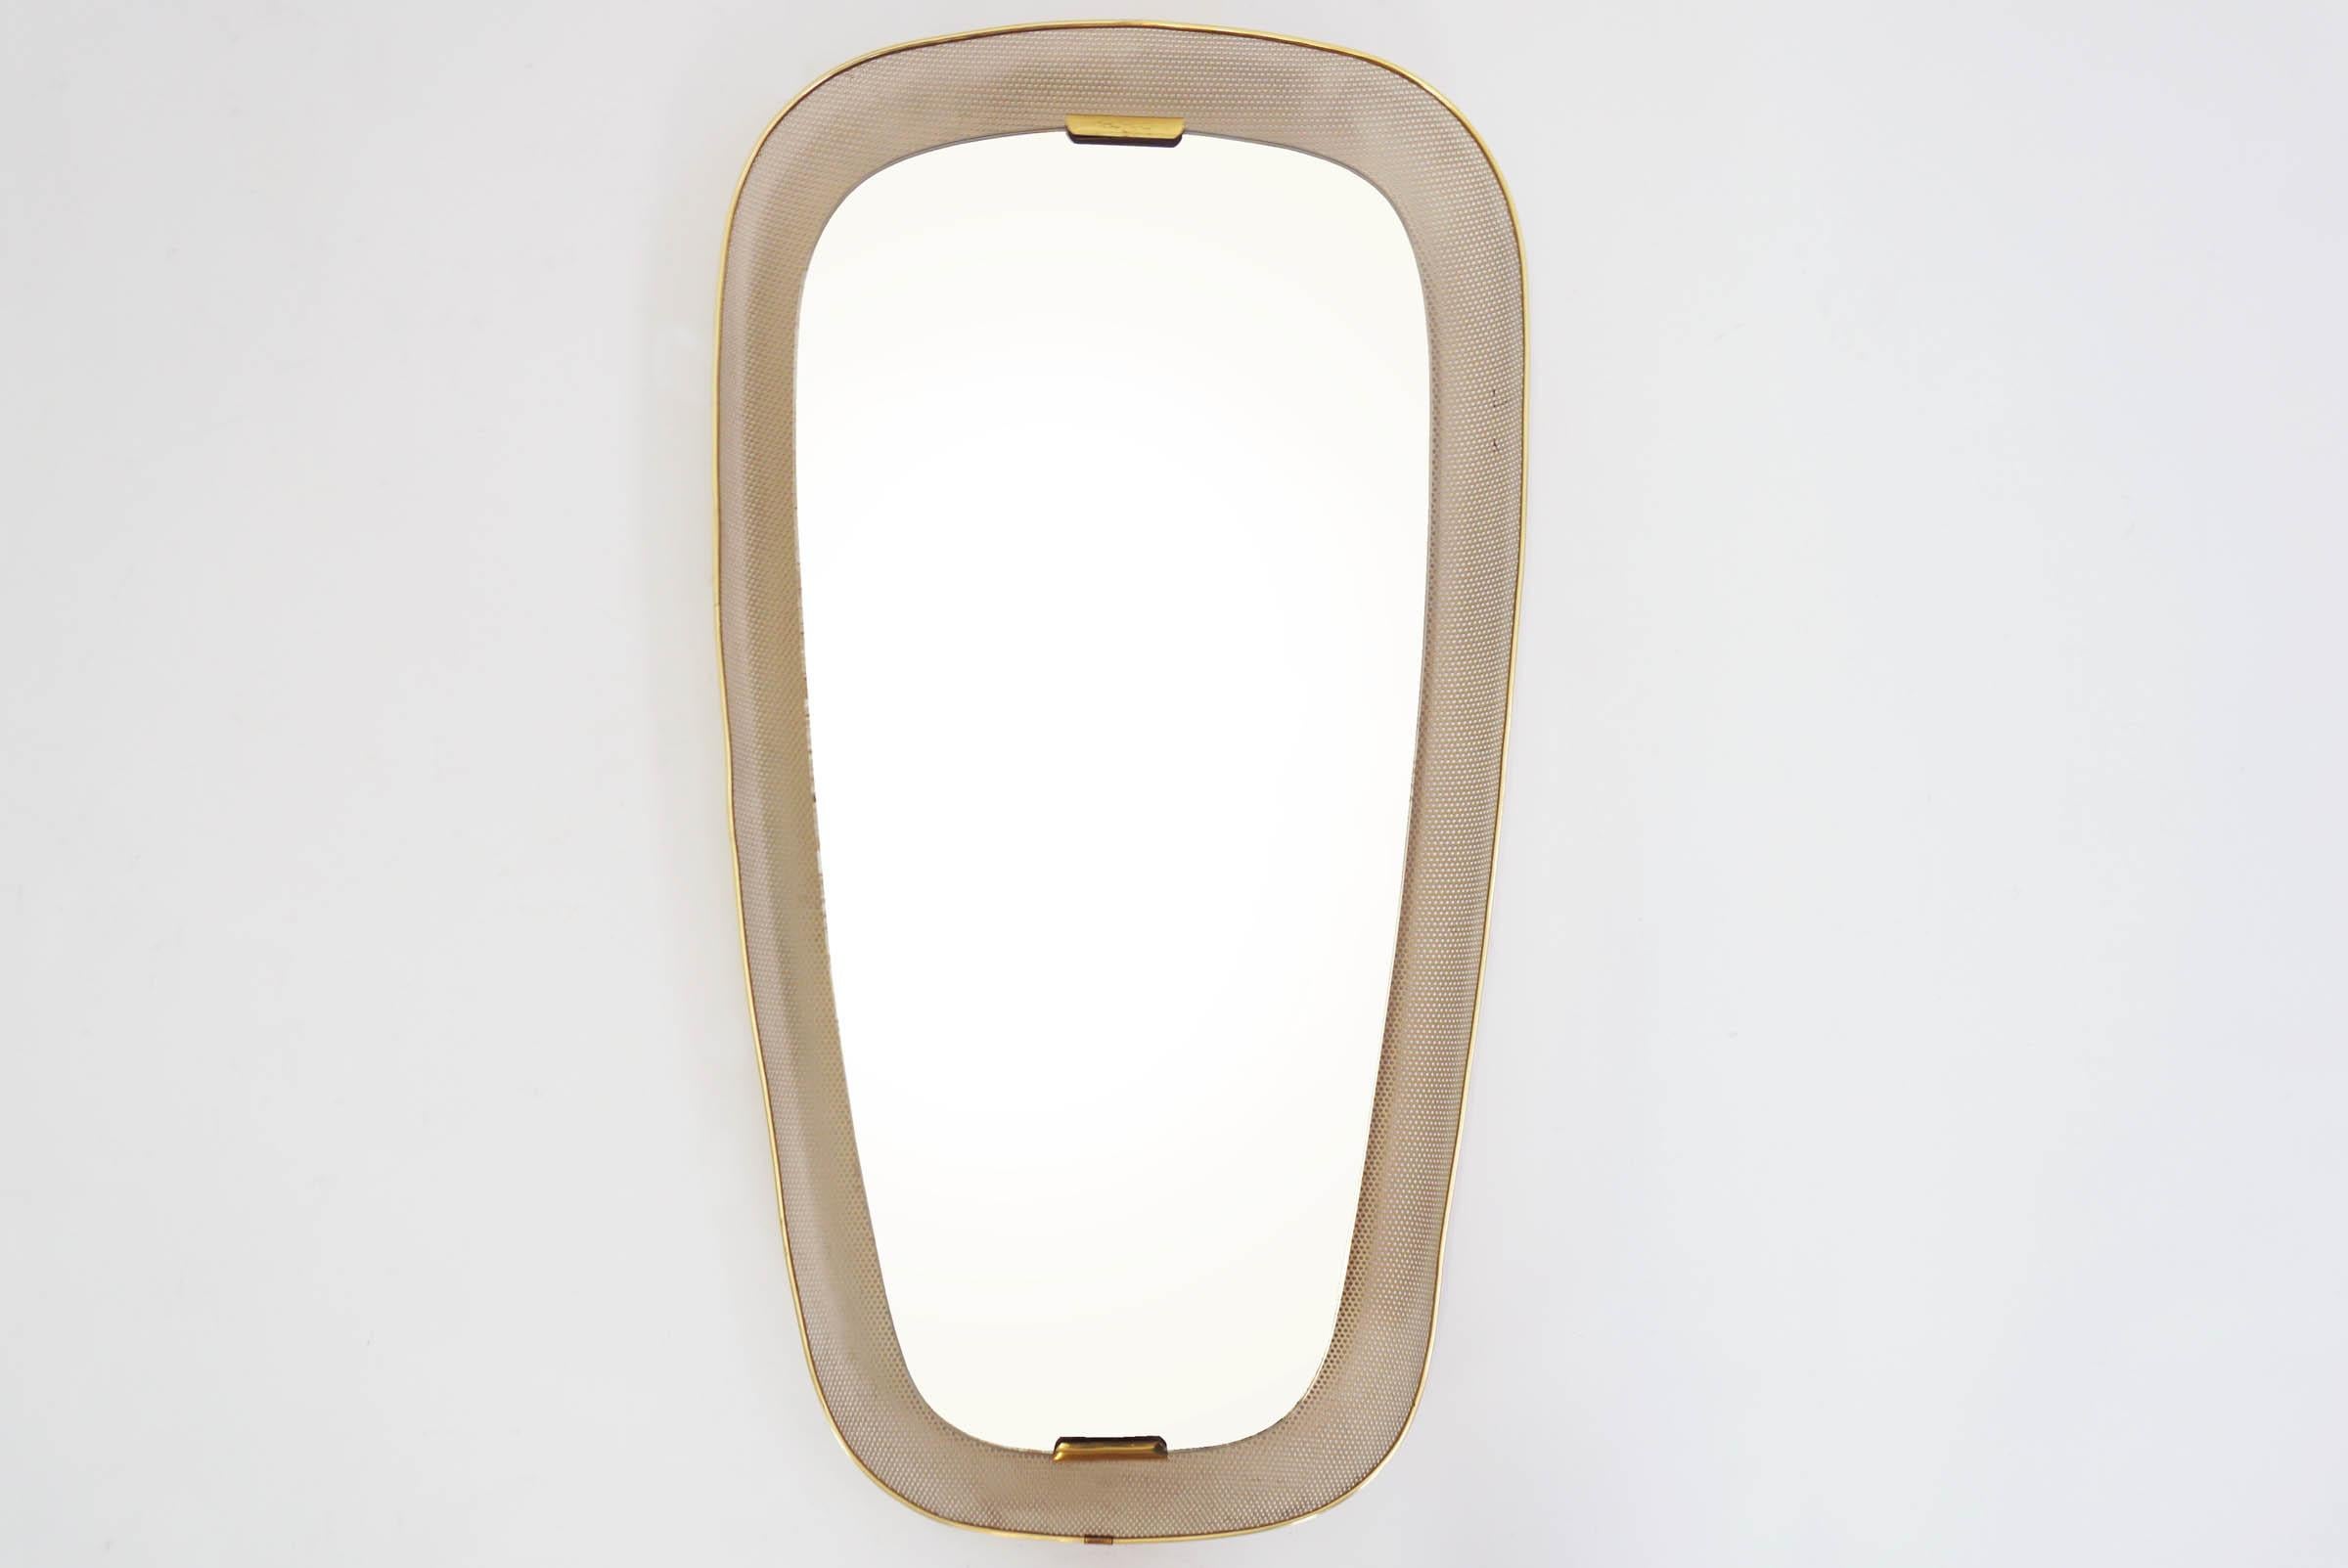 Beutiful mirror with sexy back light 
1950, France.